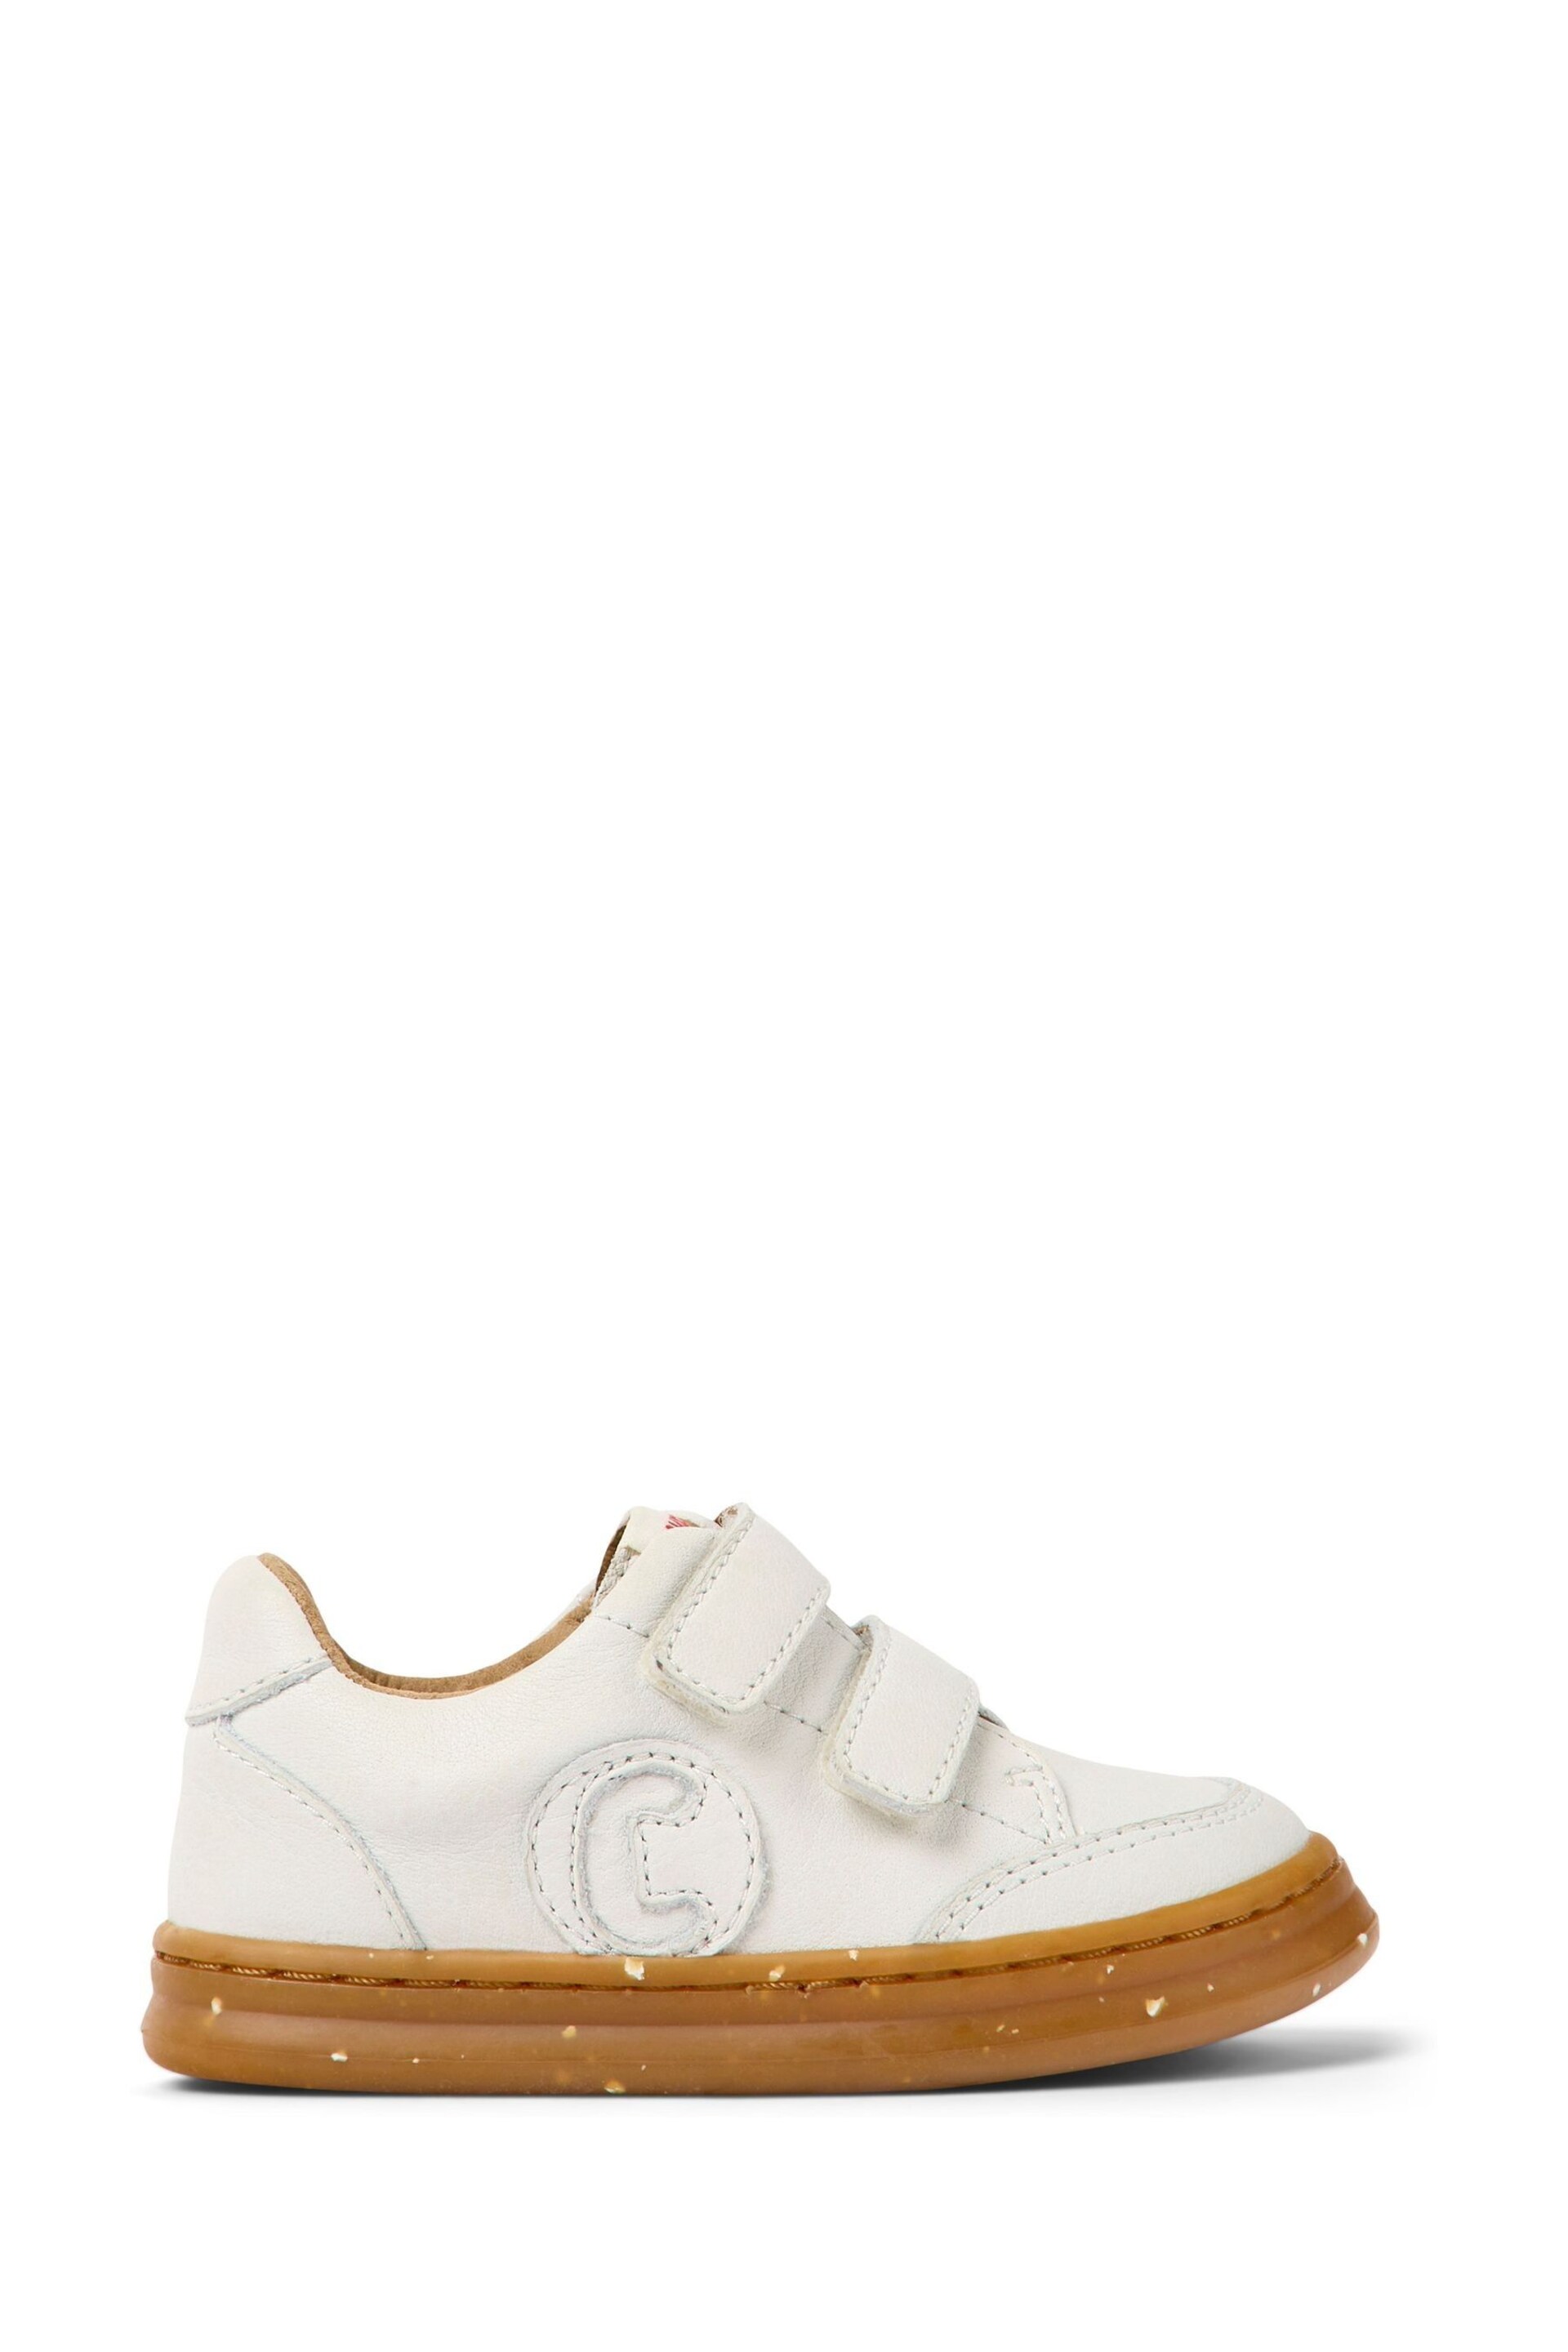 Runner Four First Walkers Non Dyed White Leather Sneakers - Image 1 of 5